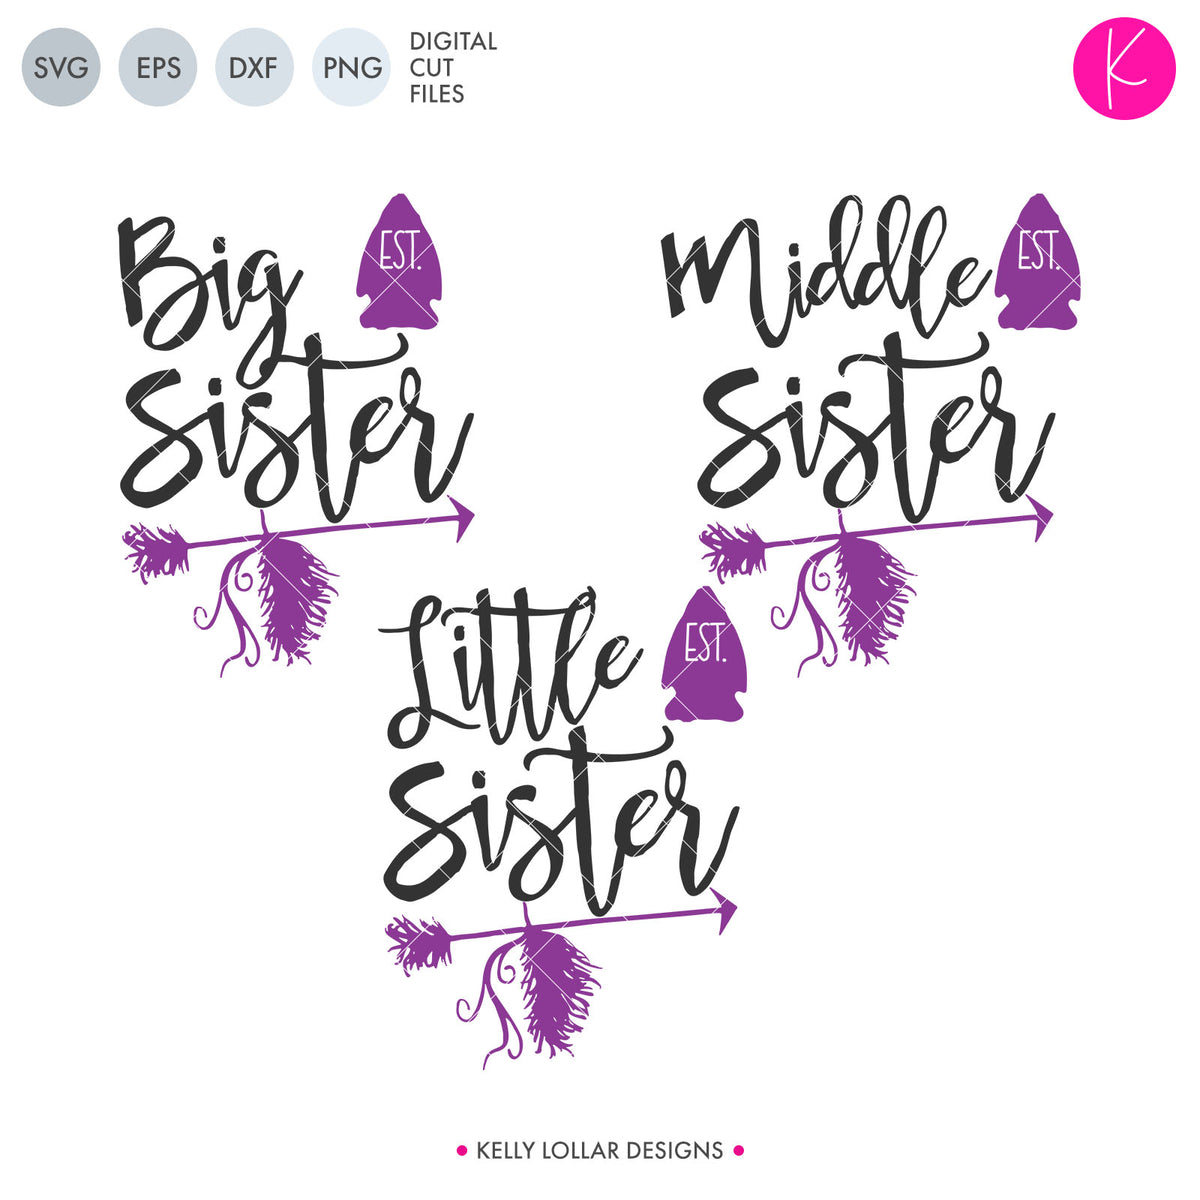 Sisters with Arrows | SVG DXF EPS PNG Cut Files